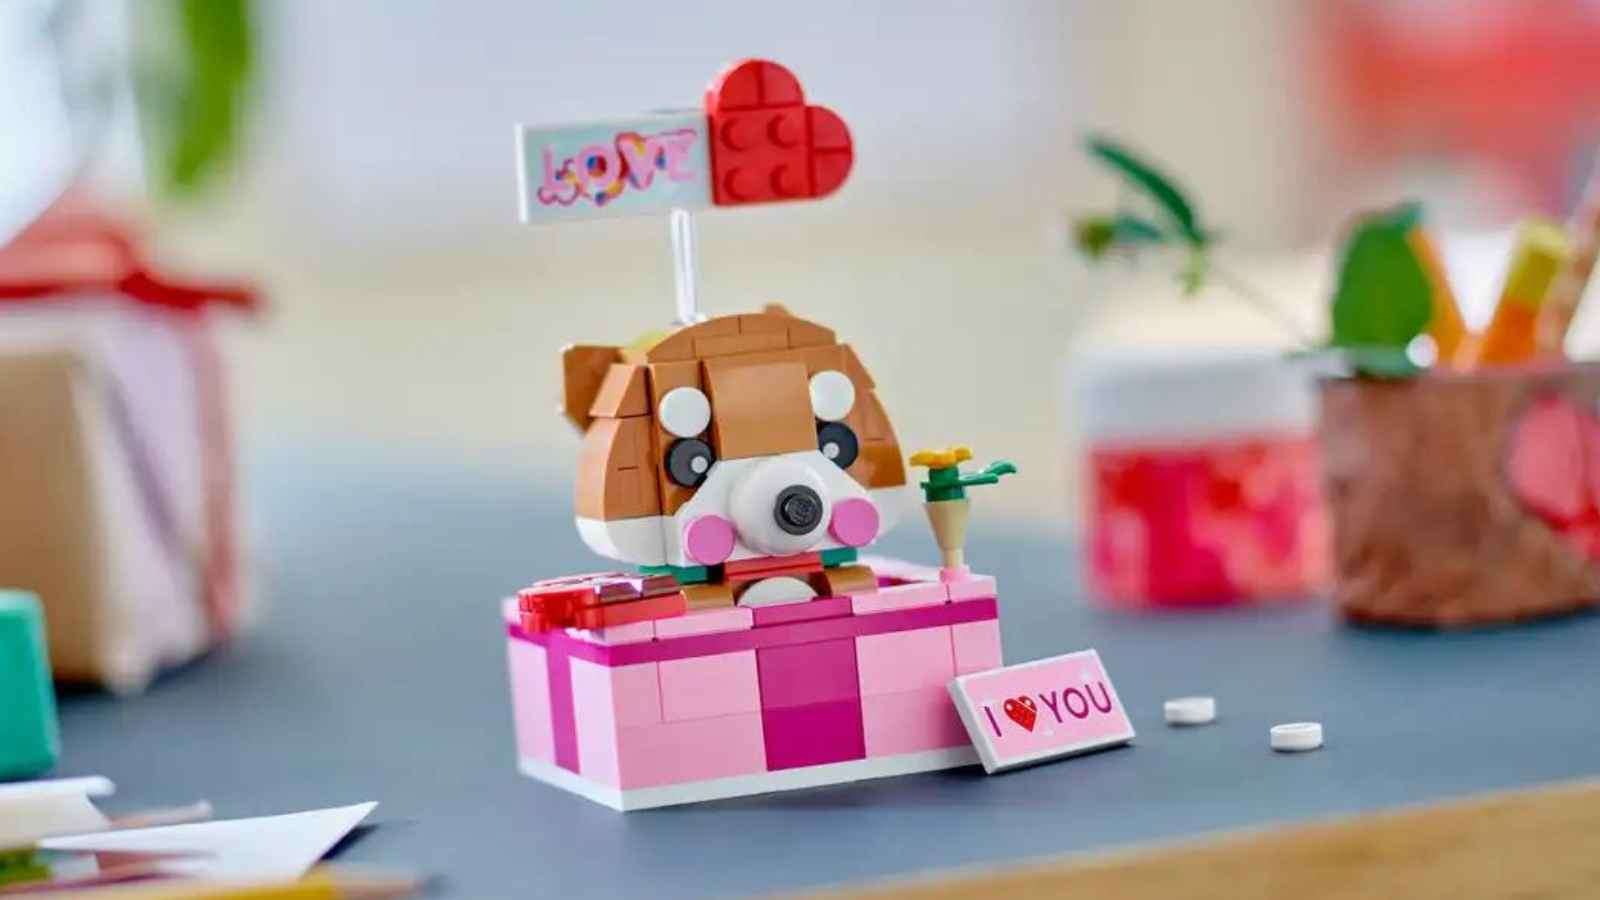 The LEGO Love Gift Box on display